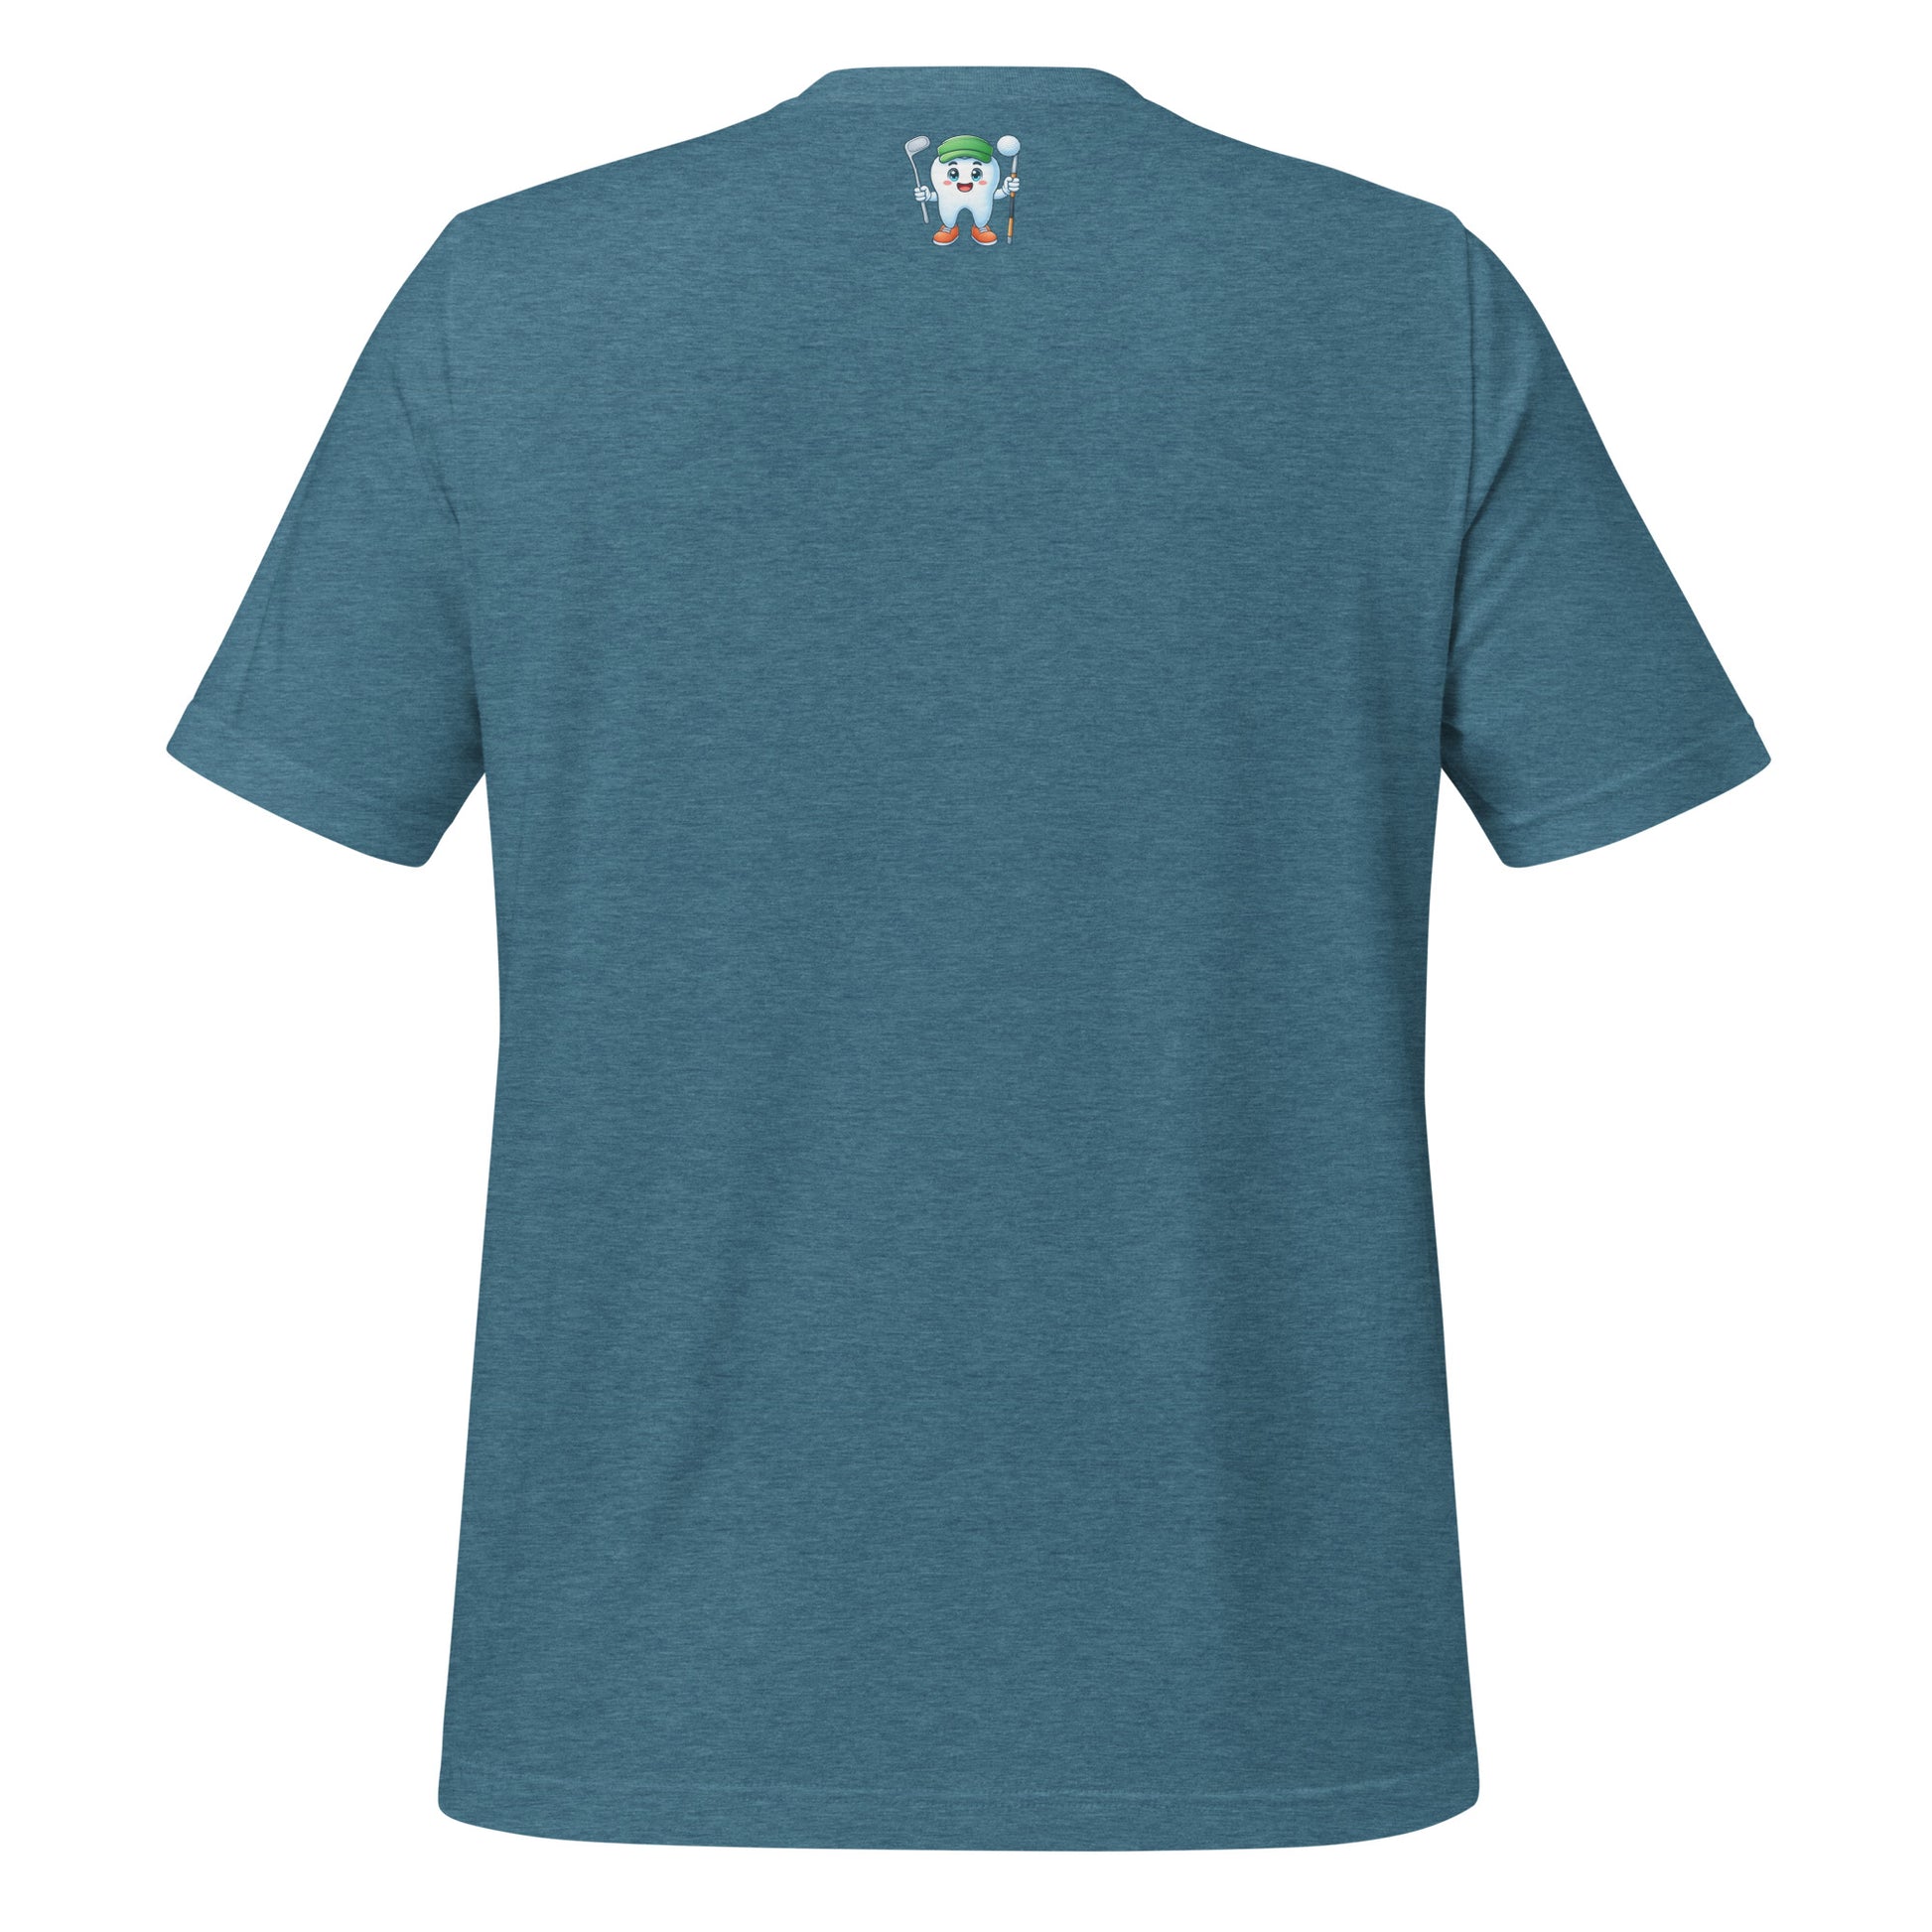 Cute dentist t-shirt showcasing an adorable tooth character in golf attire, joyfully celebrating a ‘hole in one’ achievement, perfect for dentist and dental professionals seeking unique and thematic dental apparel. Heather deep teal color, back view.